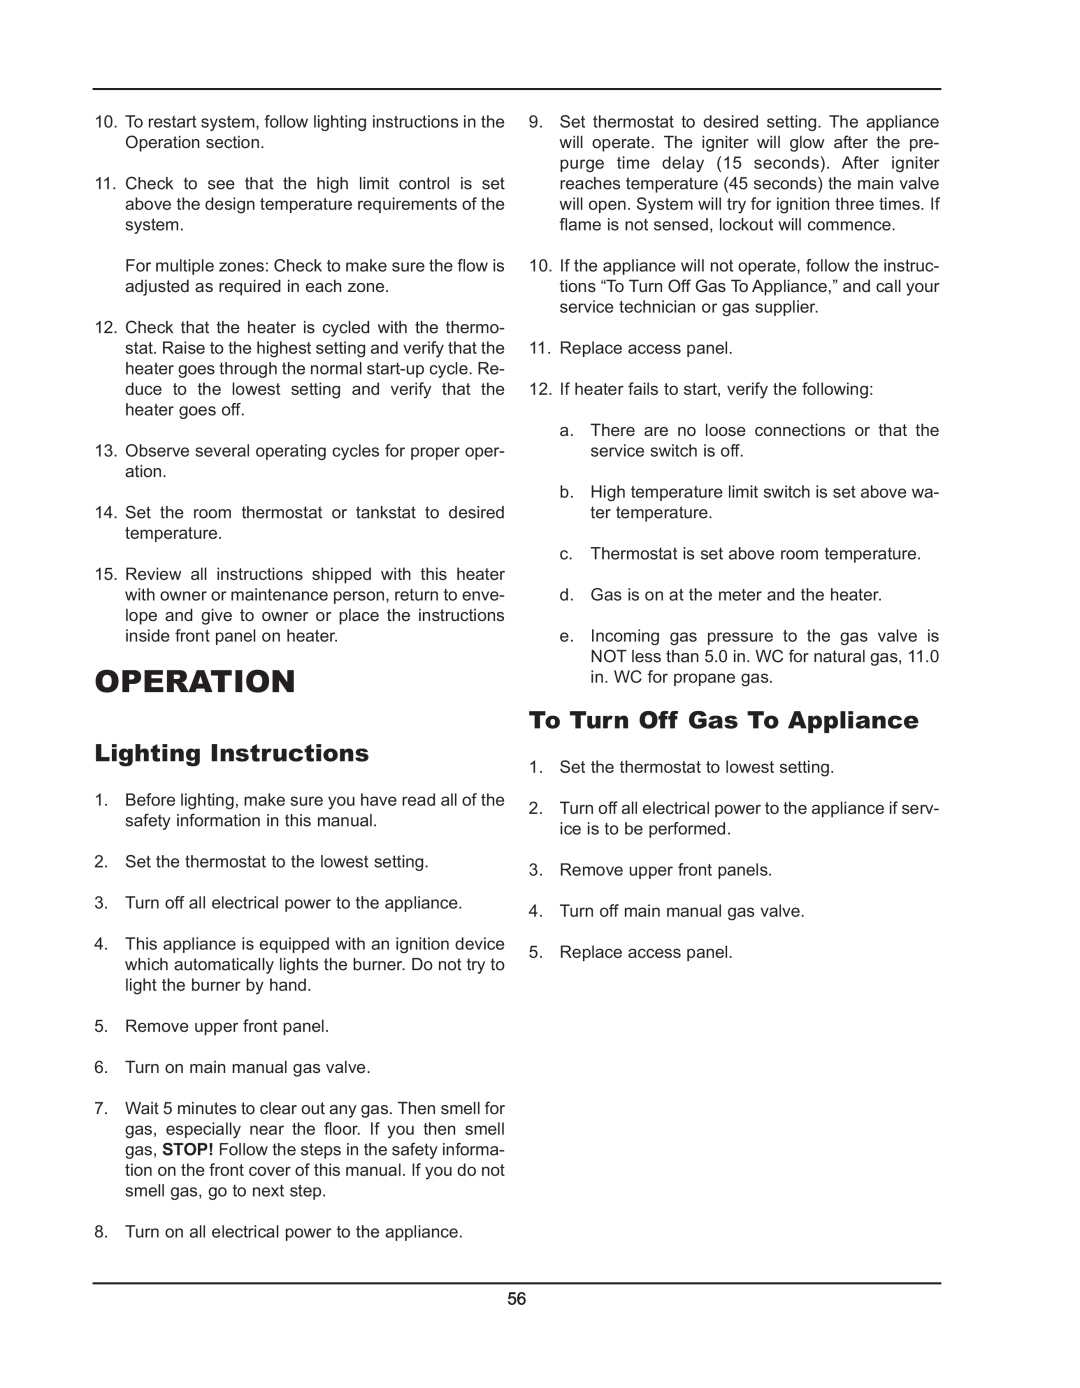 Raypak 992B manual Operation, Lighting Instructions, To Turn Off Gas To Appliance 